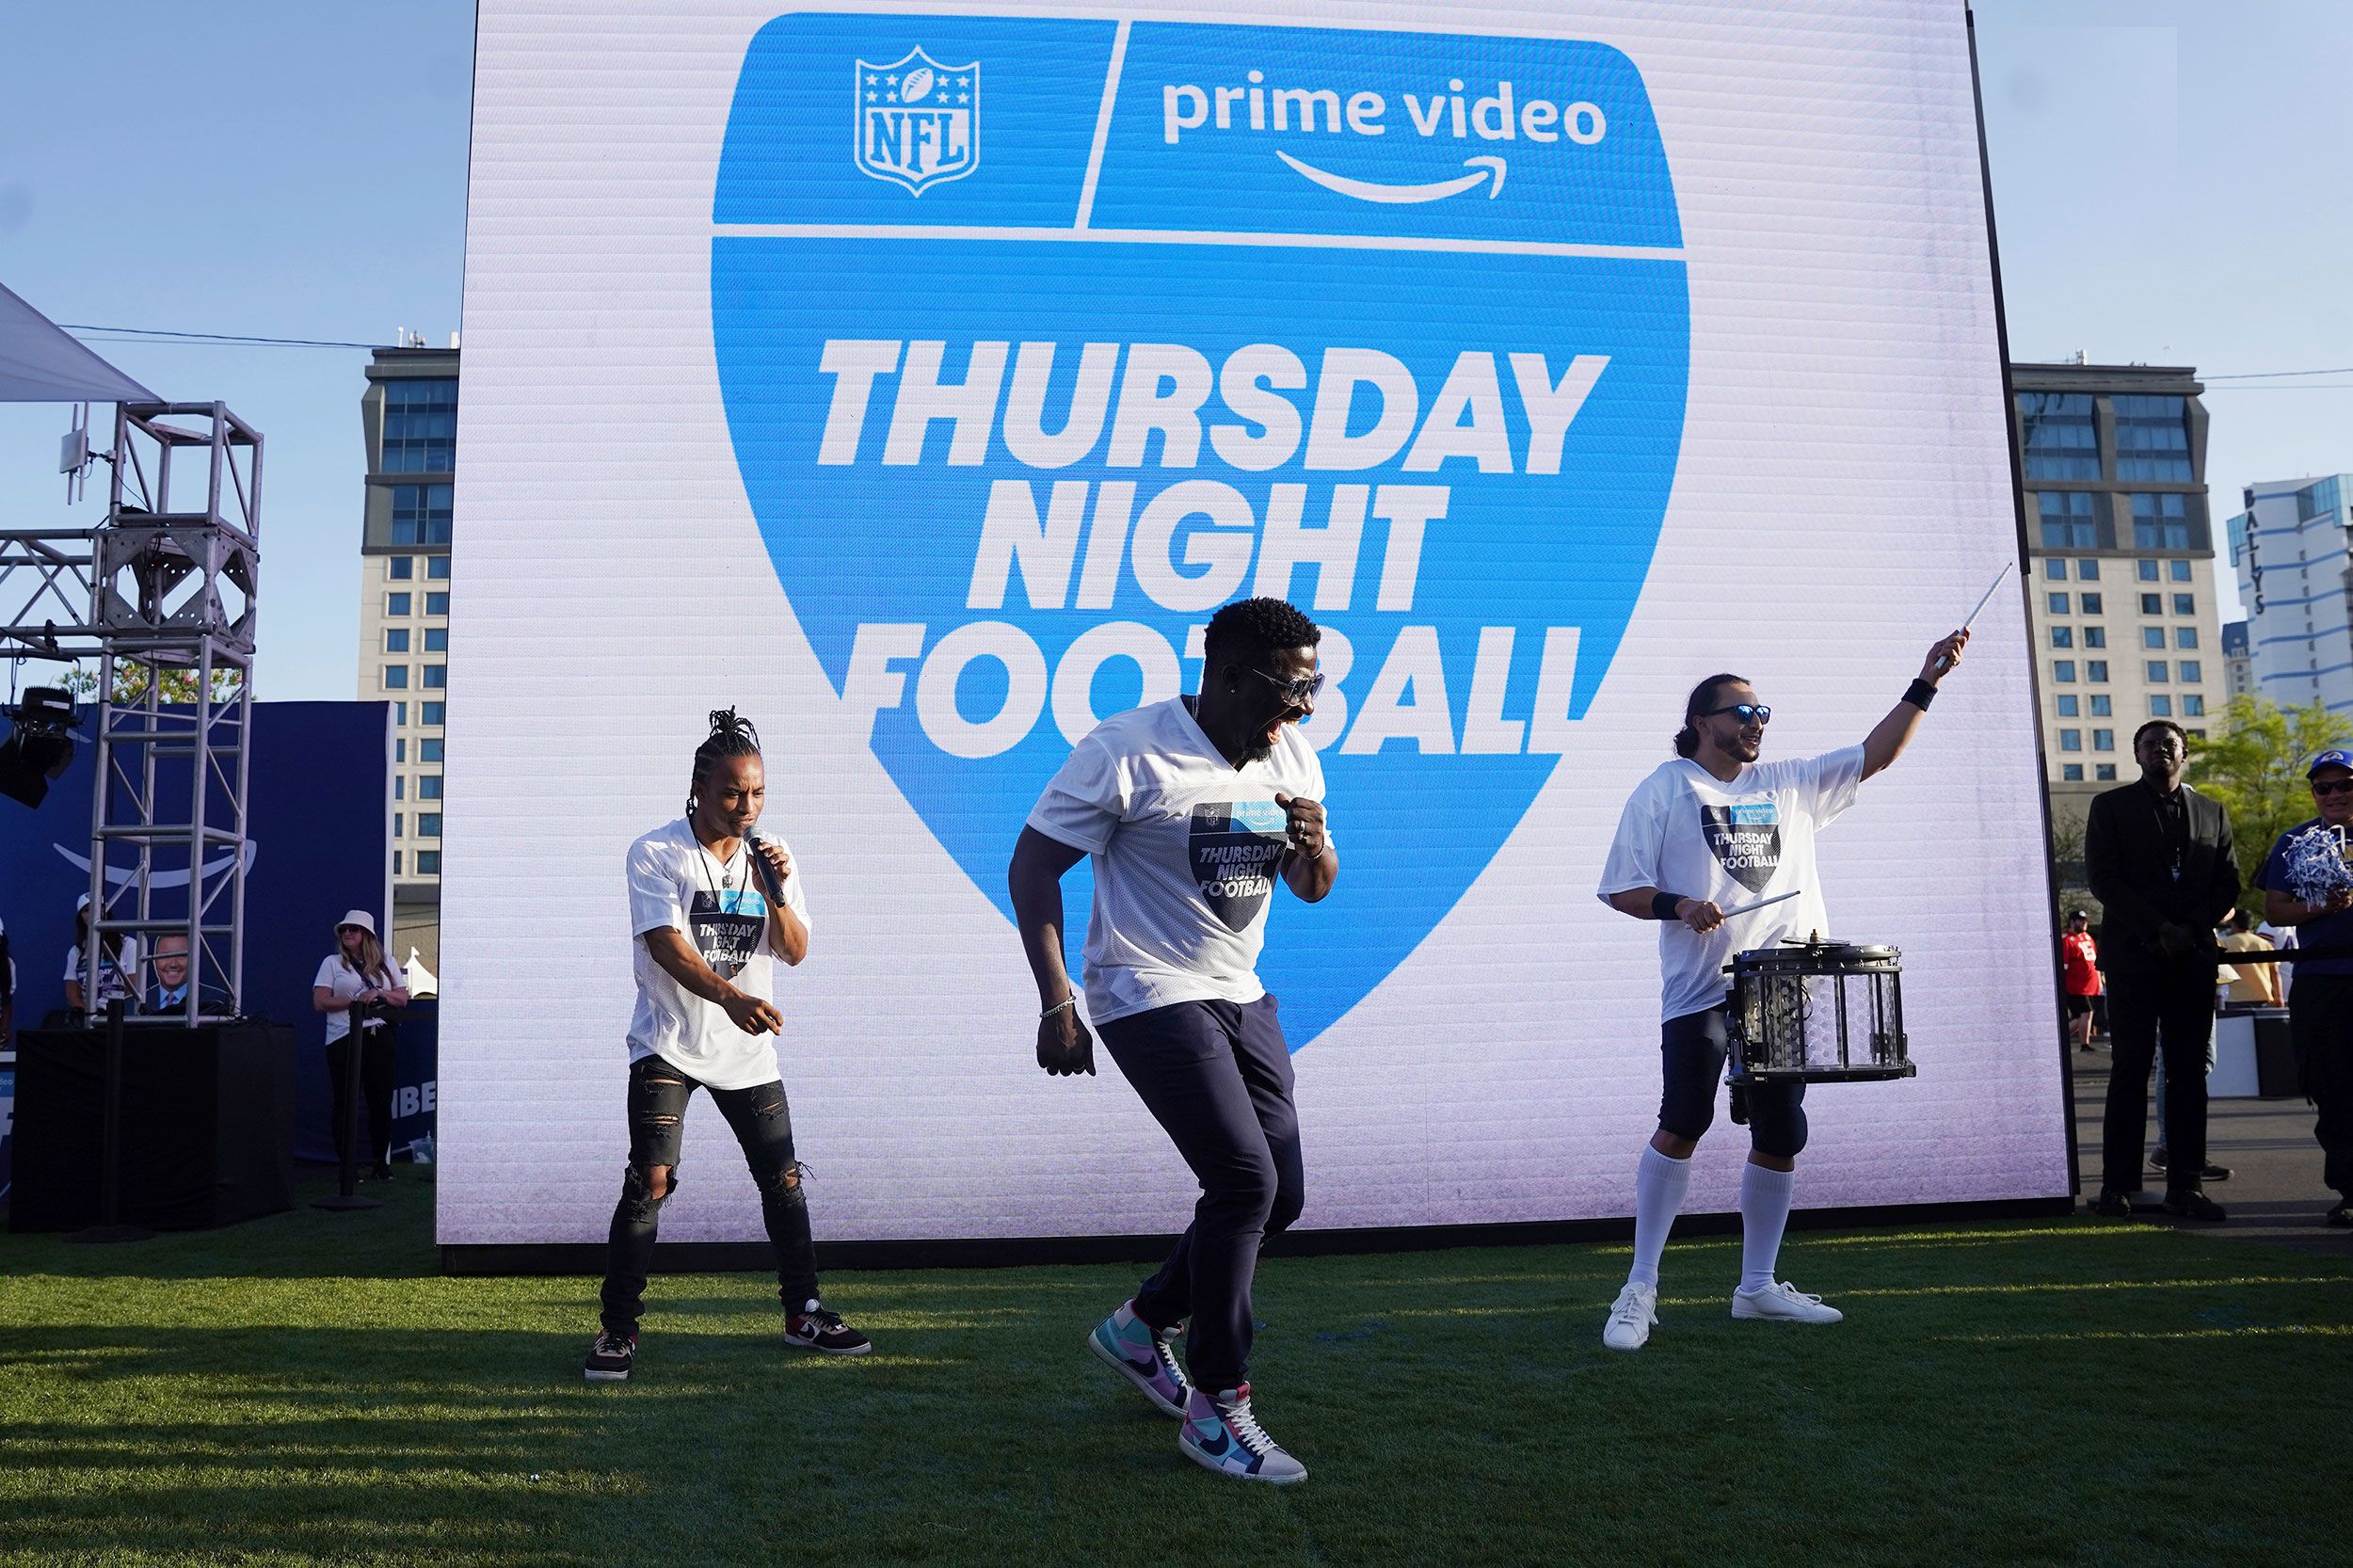 what network is broadcasting thursday night football tonight